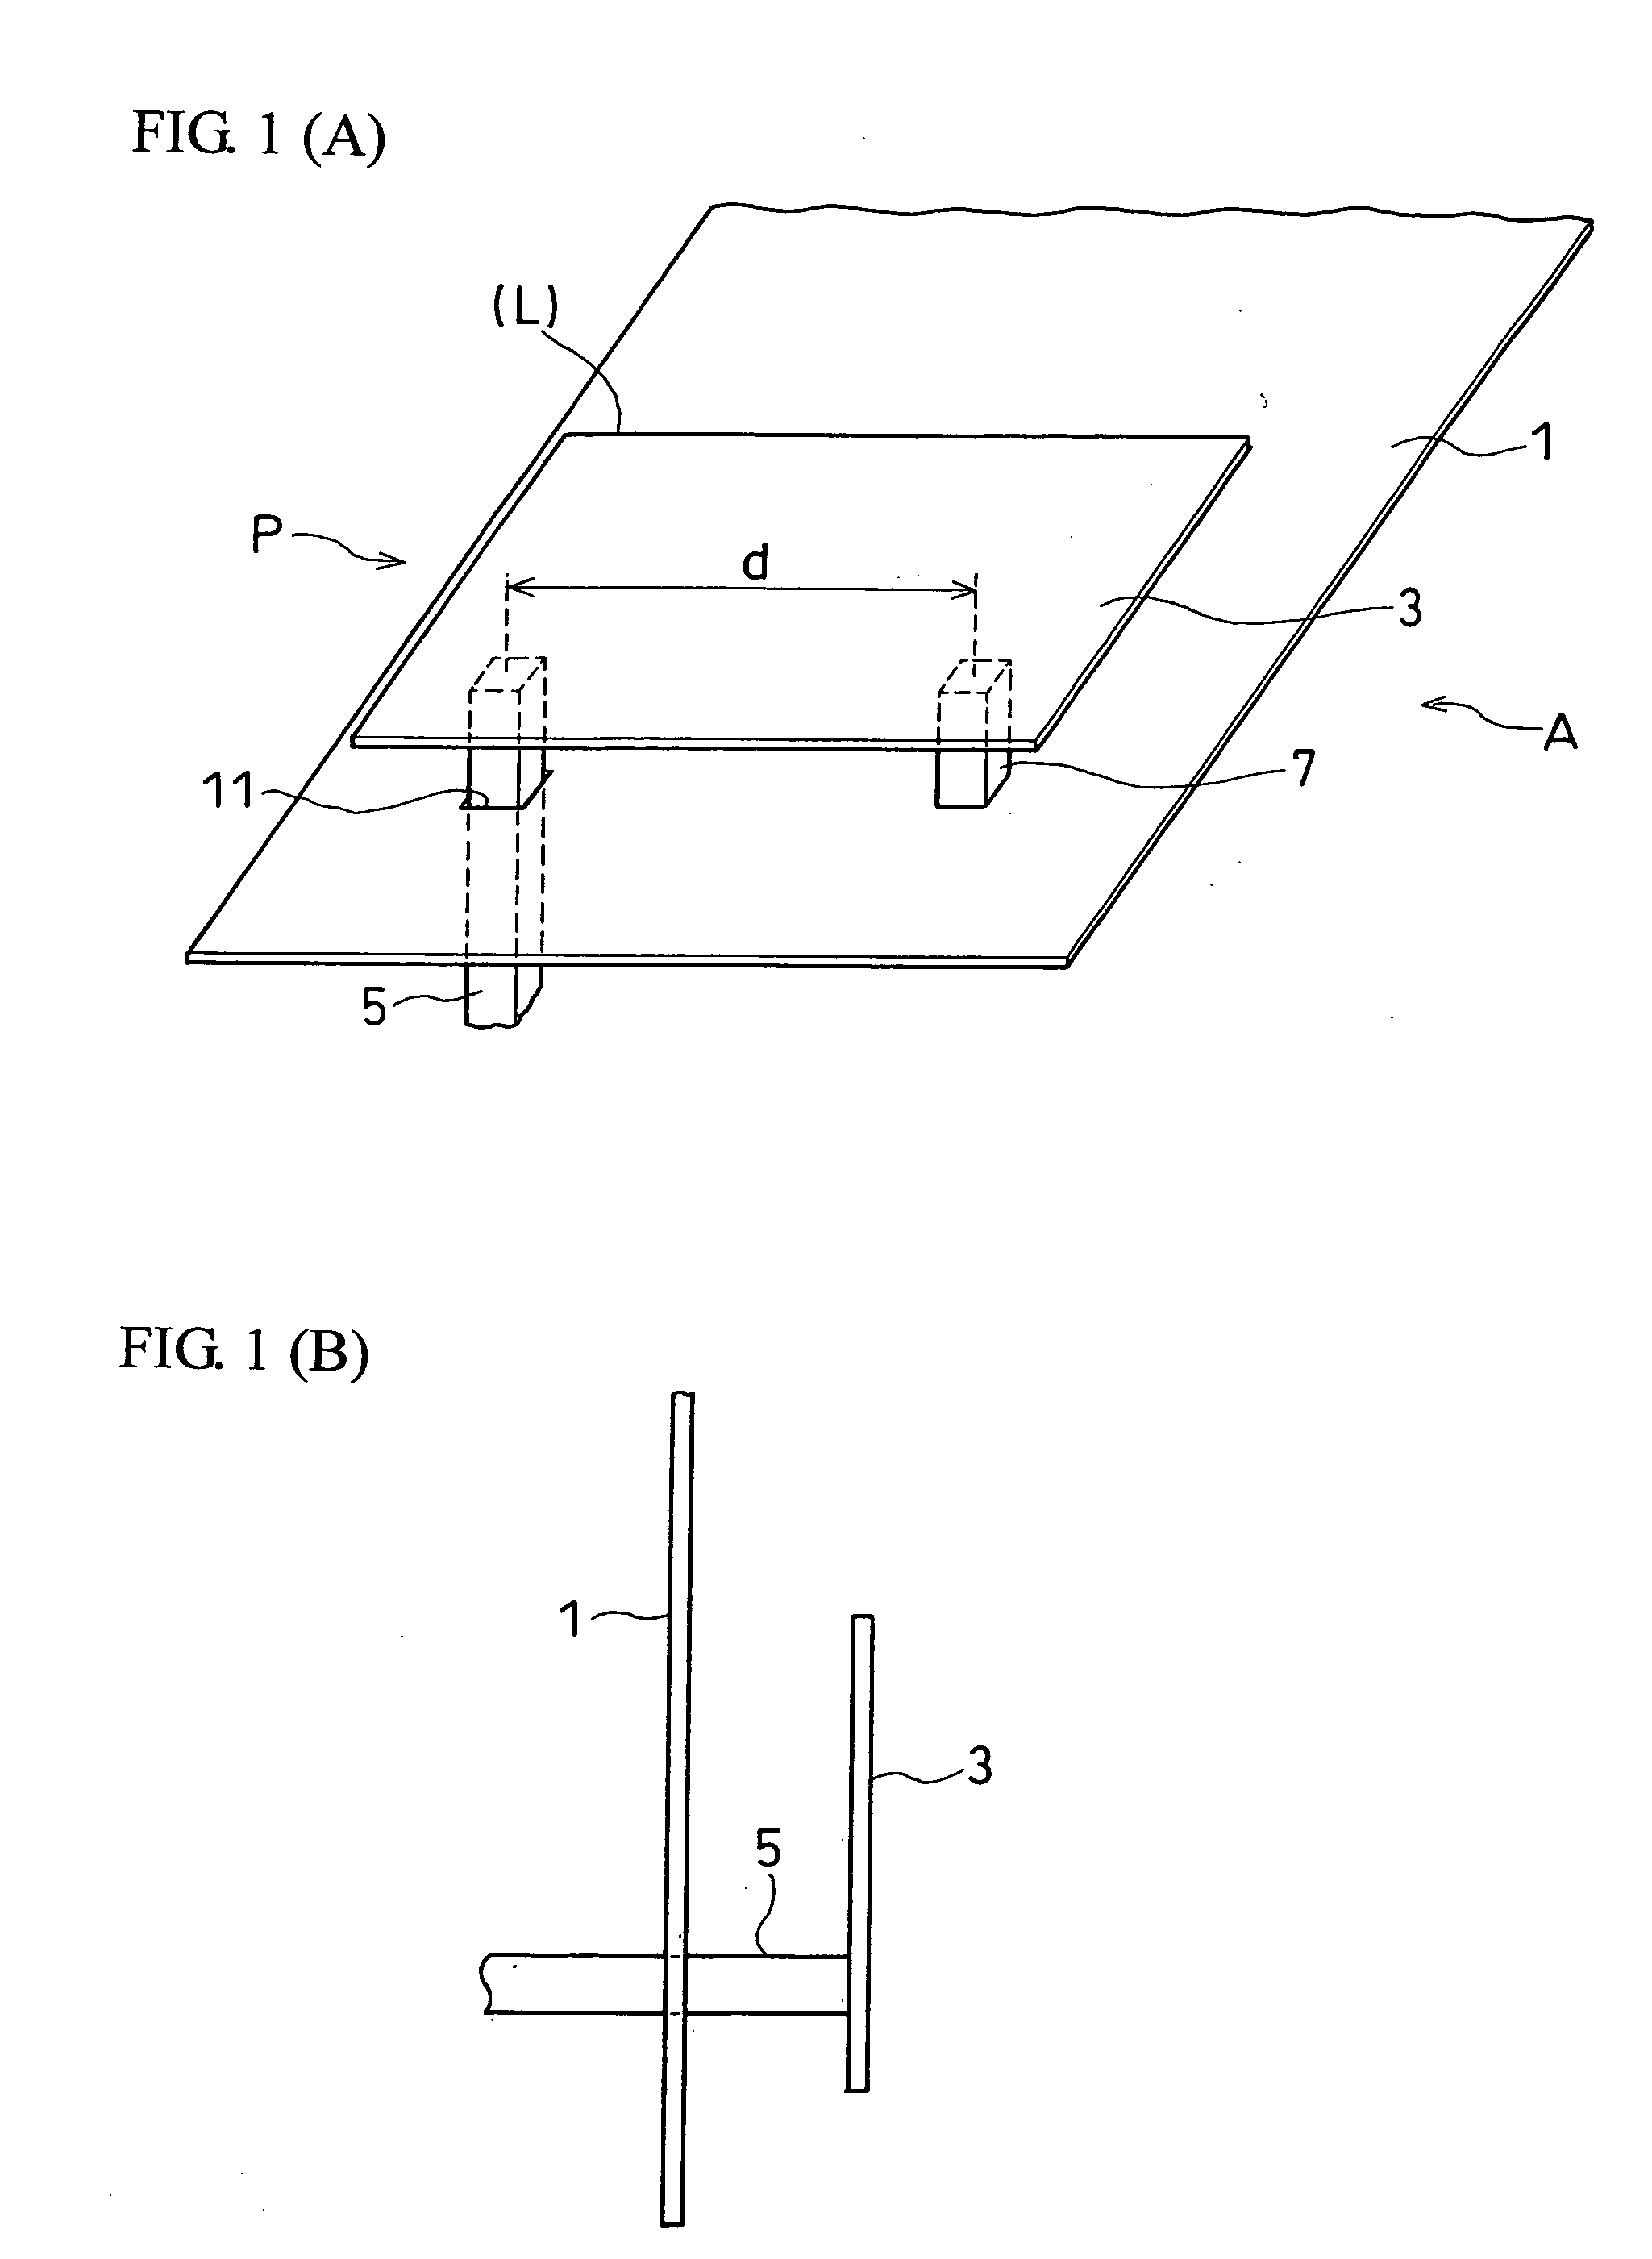 Antenna and mobile wireless equipment using the same